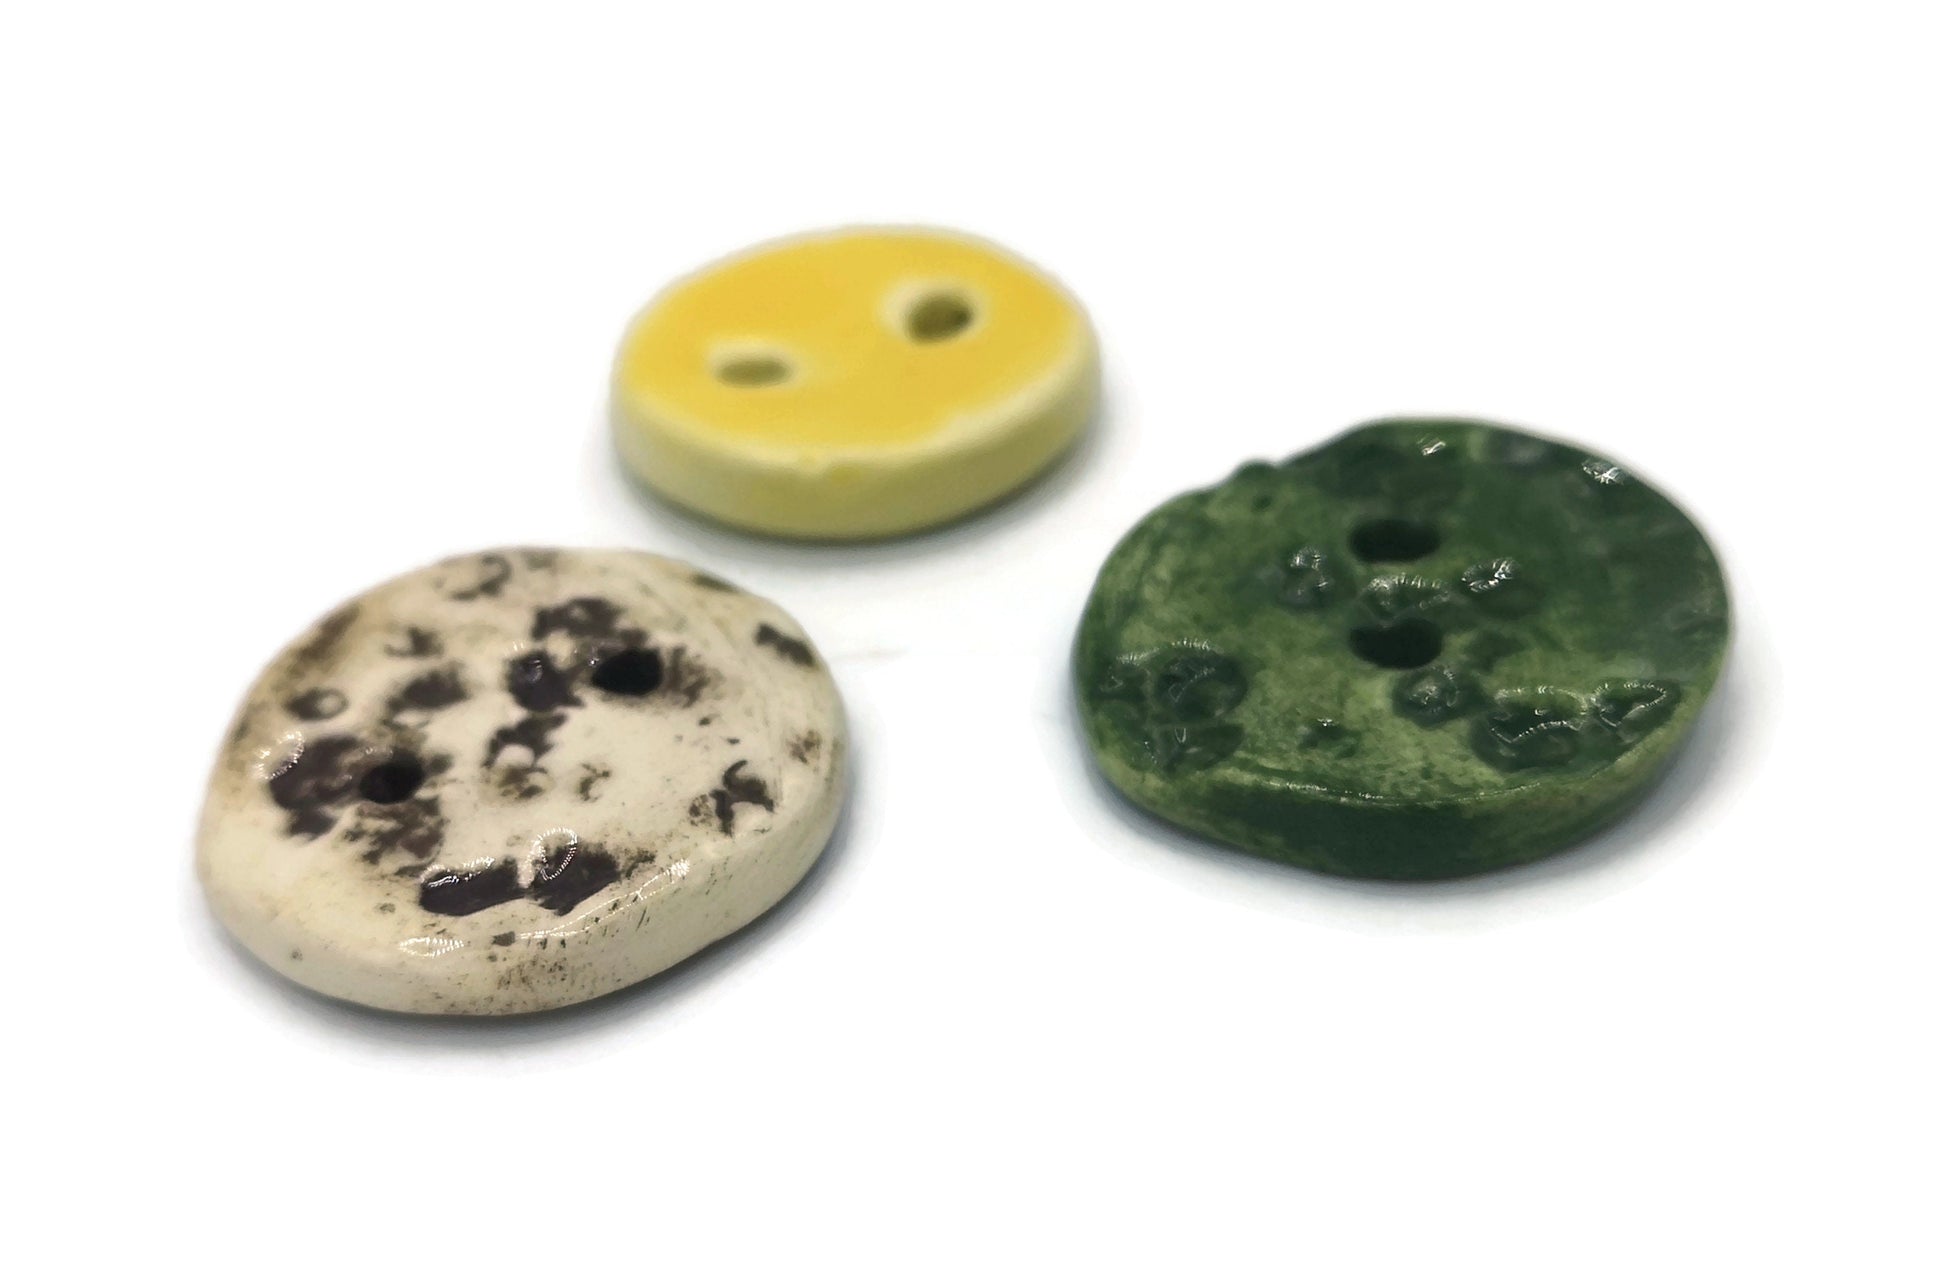 Set Of 3 Sewing Buttons Strange And Unusual, Antique Look Sewing Supplies And Notions, Handmade Ceramics, Elegant Buttons - Ceramica Ana Rafael